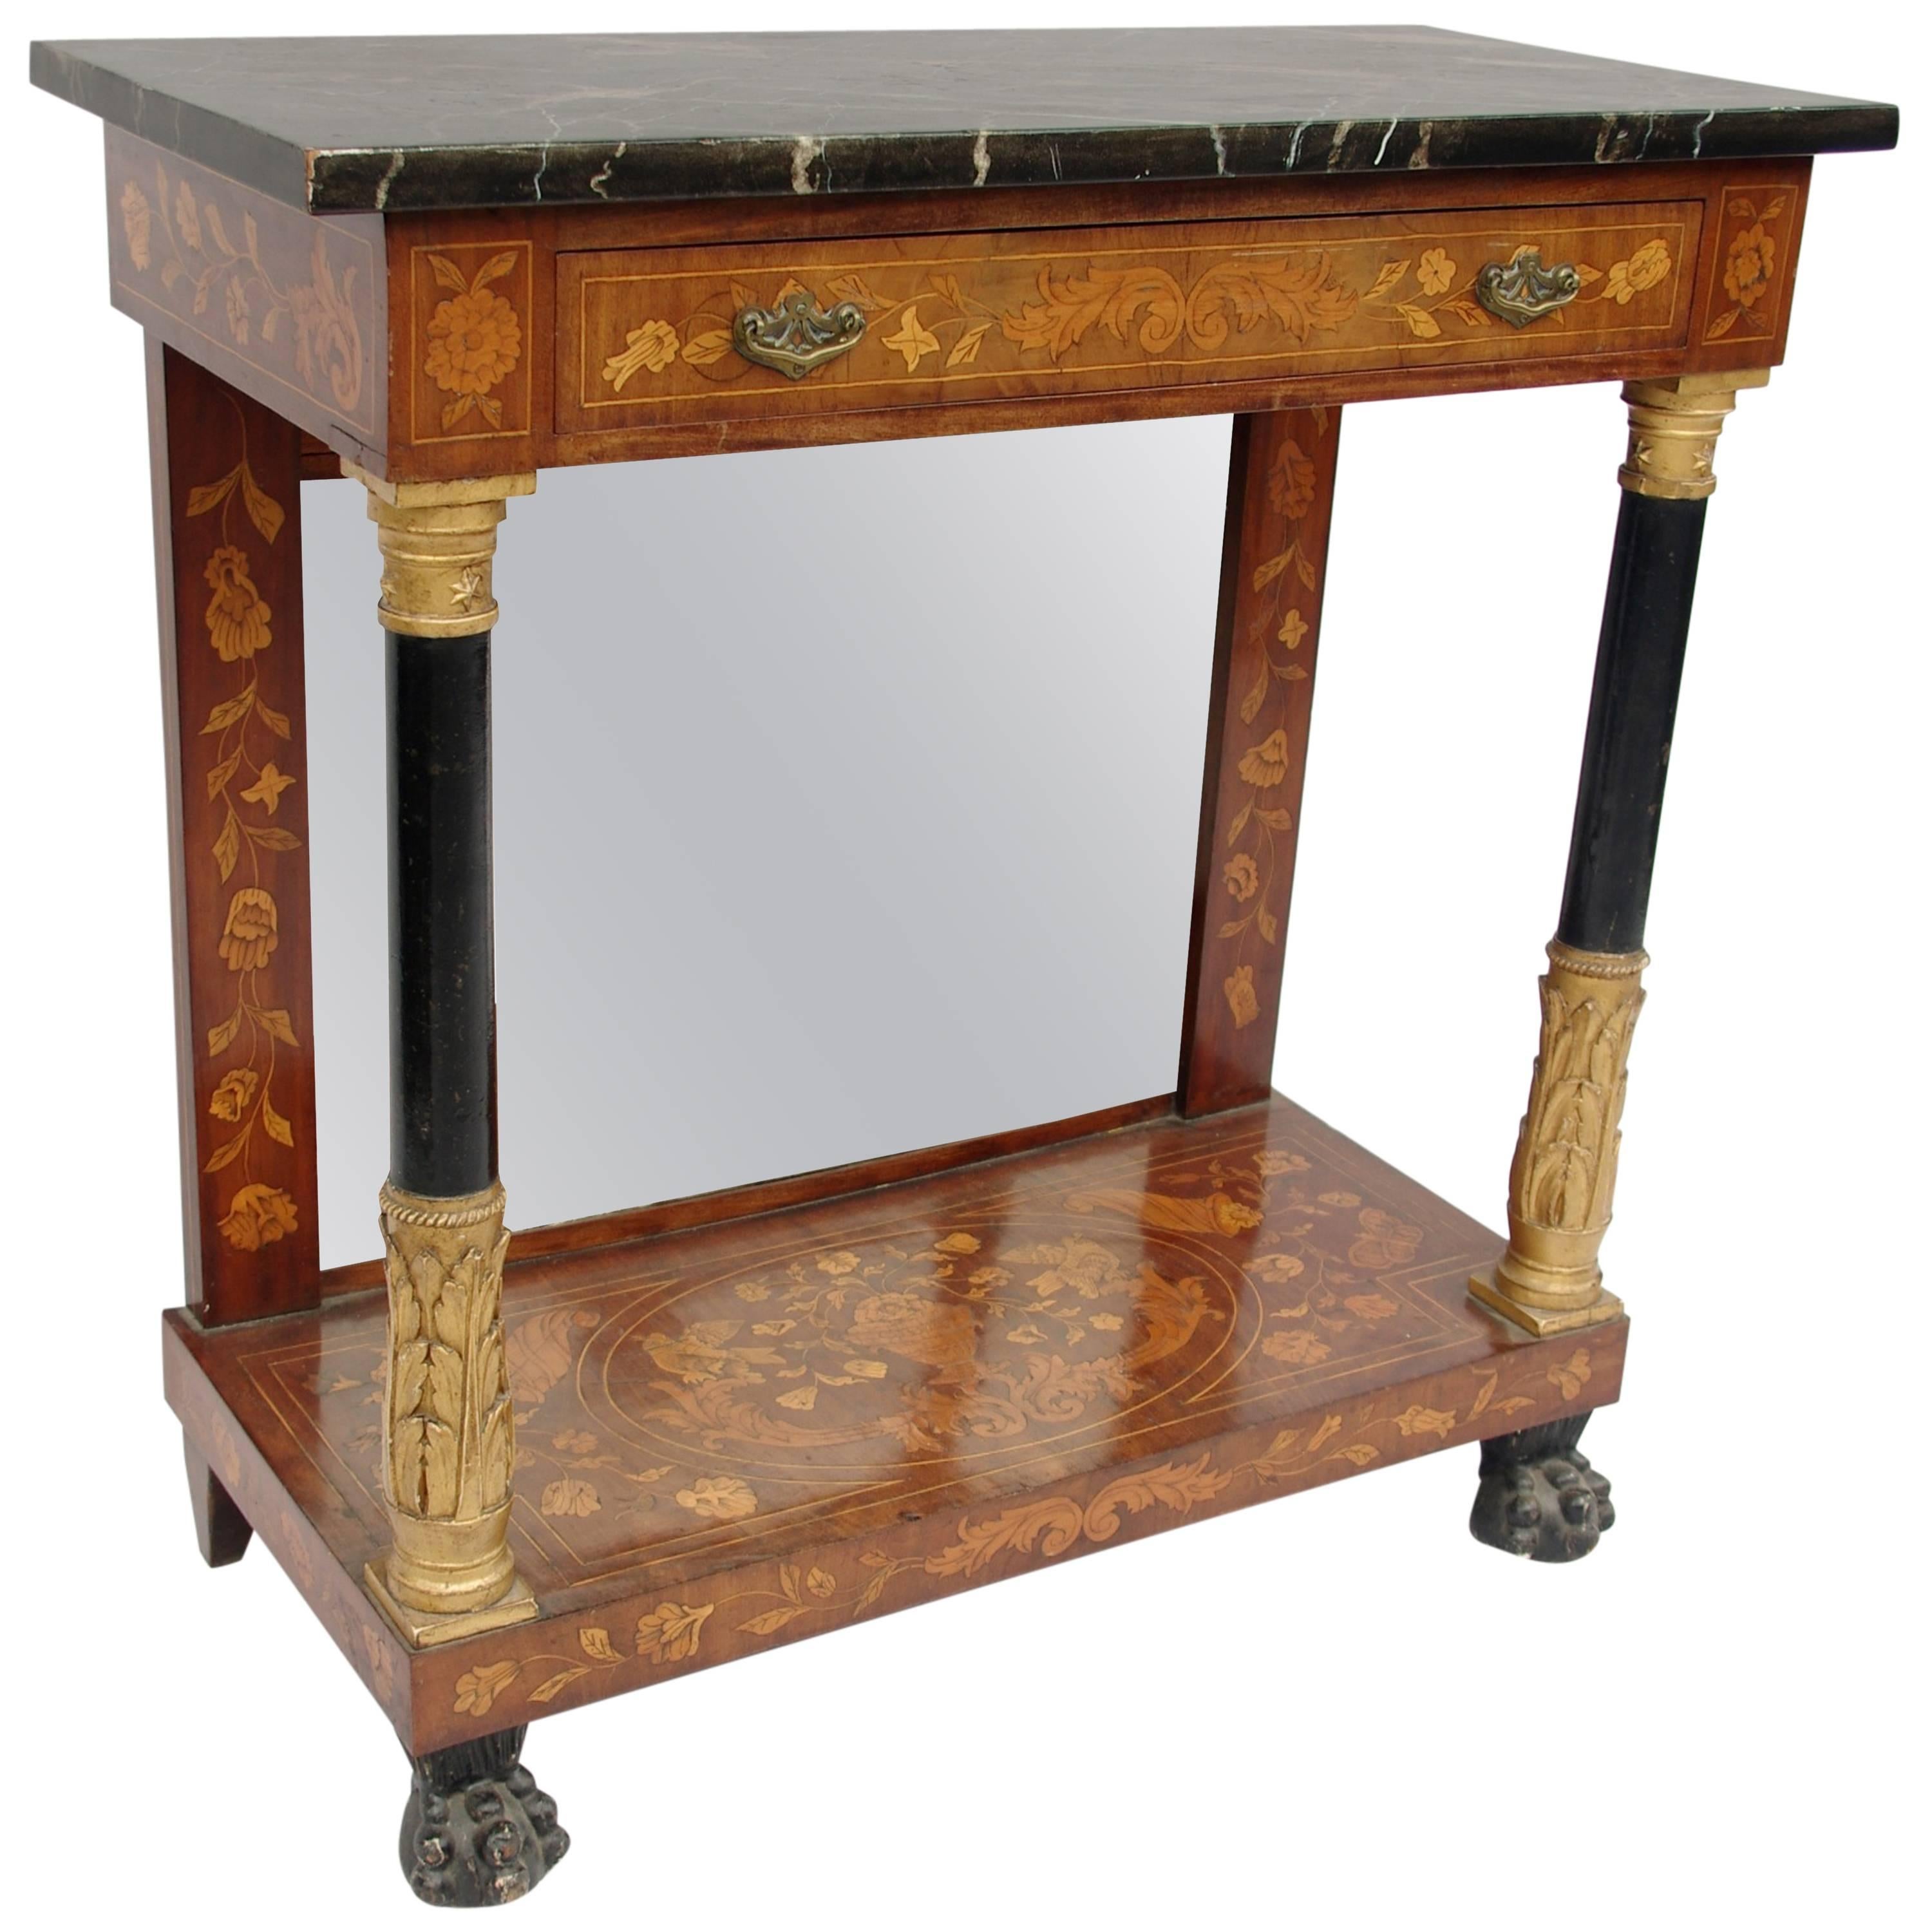 19th Century Dutch Console with Marquetry Decor